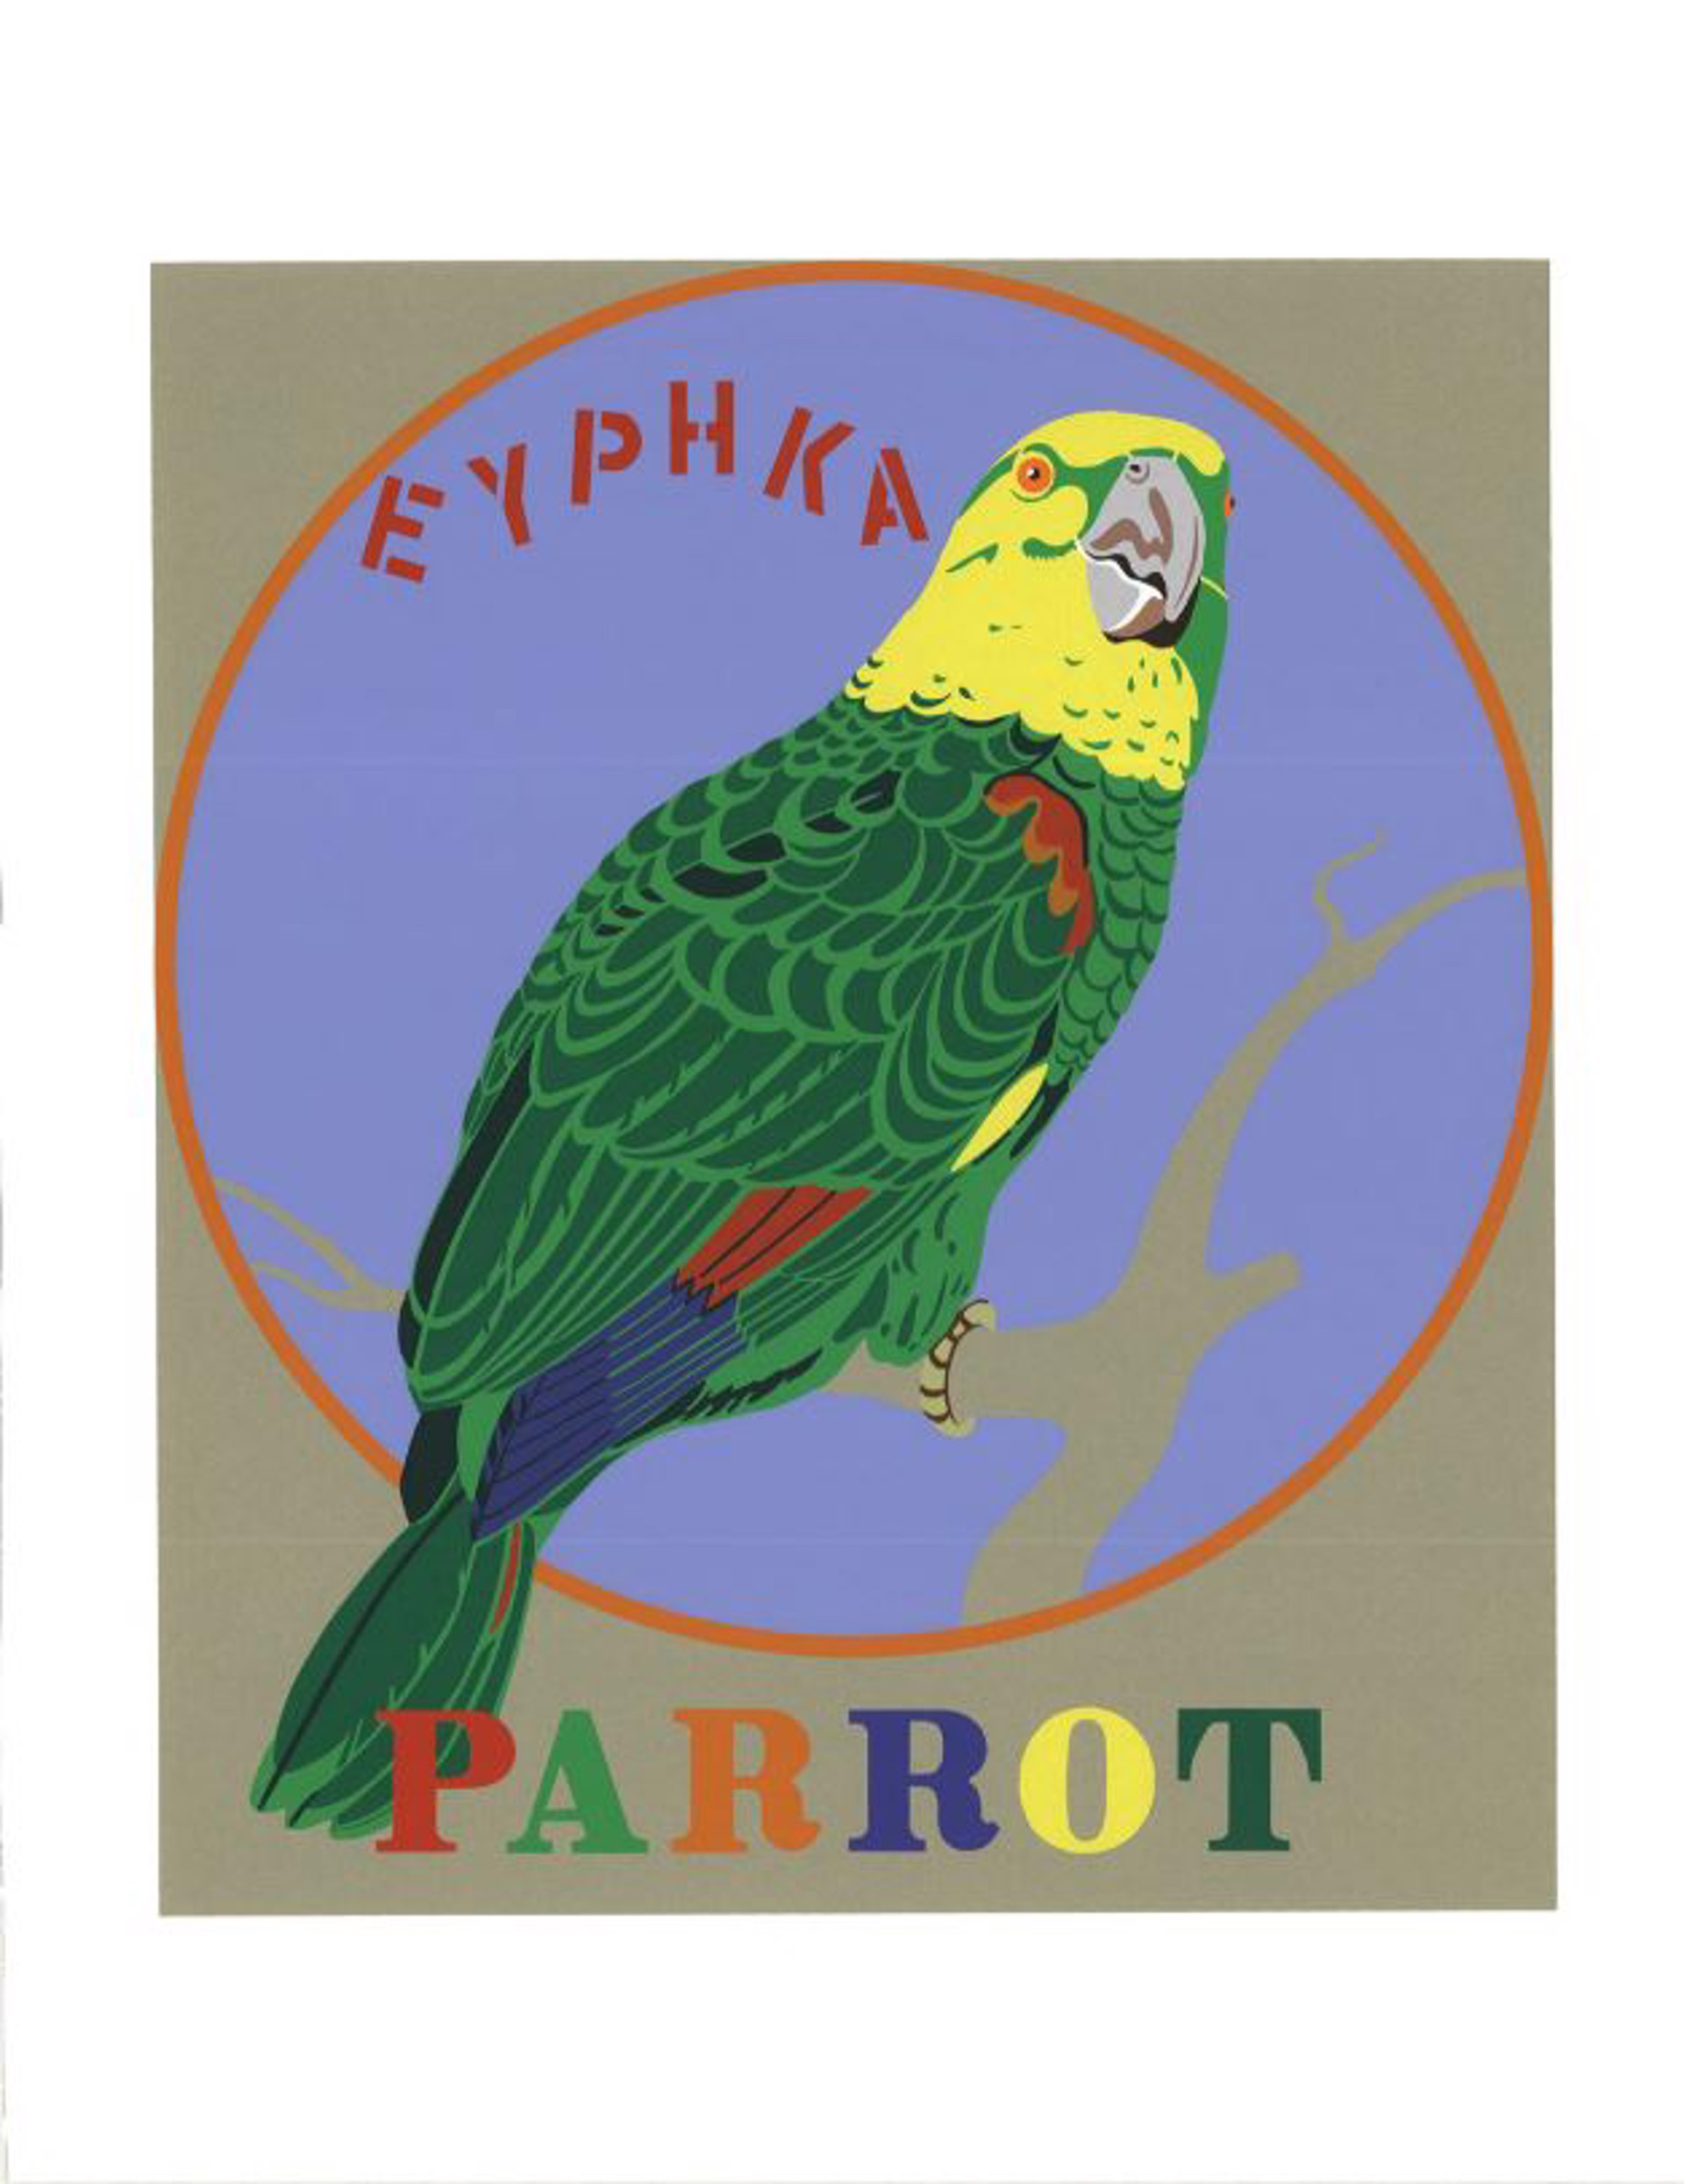 Parrot from The American Dream Portfolio by Robert Indiana